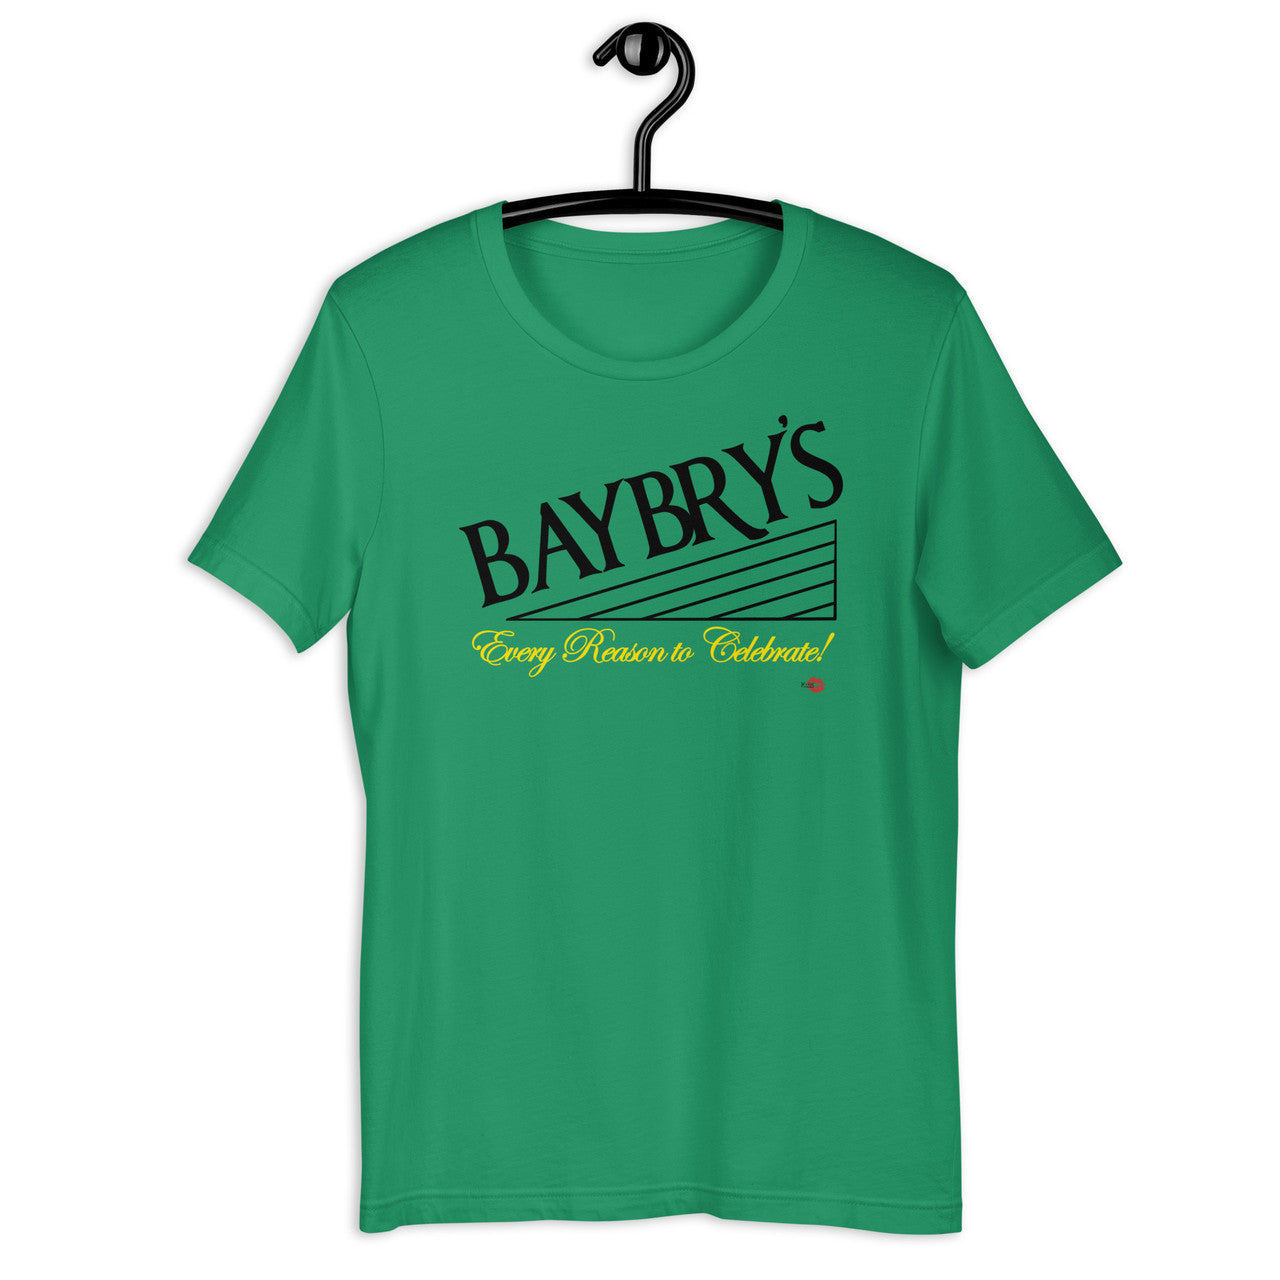 Baybry's KiSS Unisex t-shirt - Zac Efron We are your Friends Green Champagne Retro